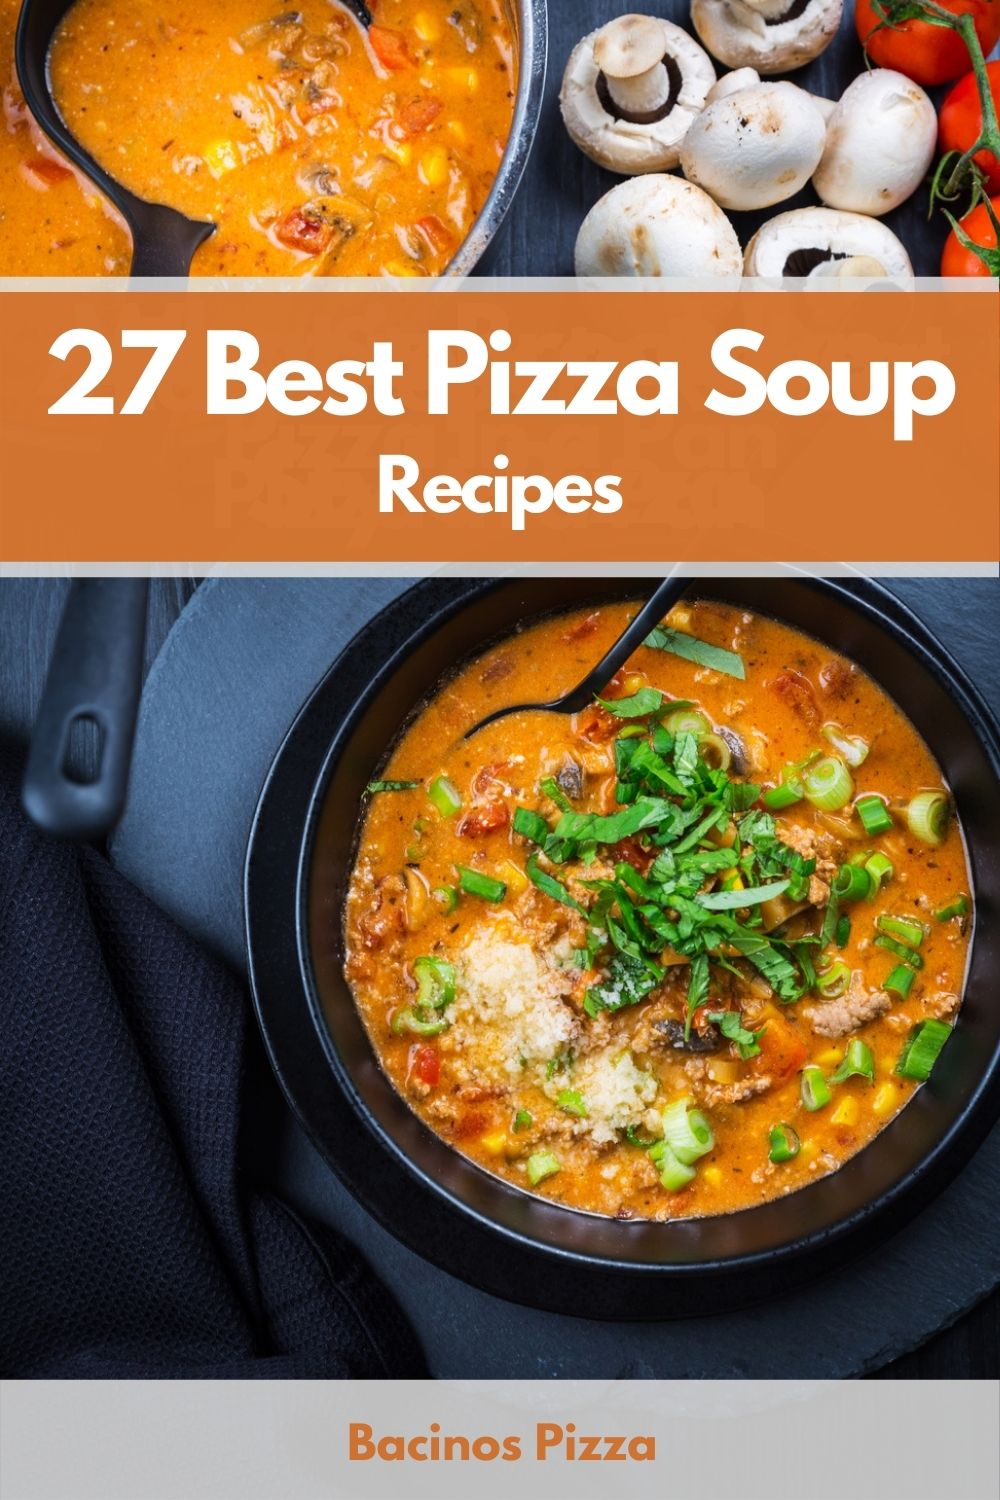 27 Best Pizza Soup Recipes pin